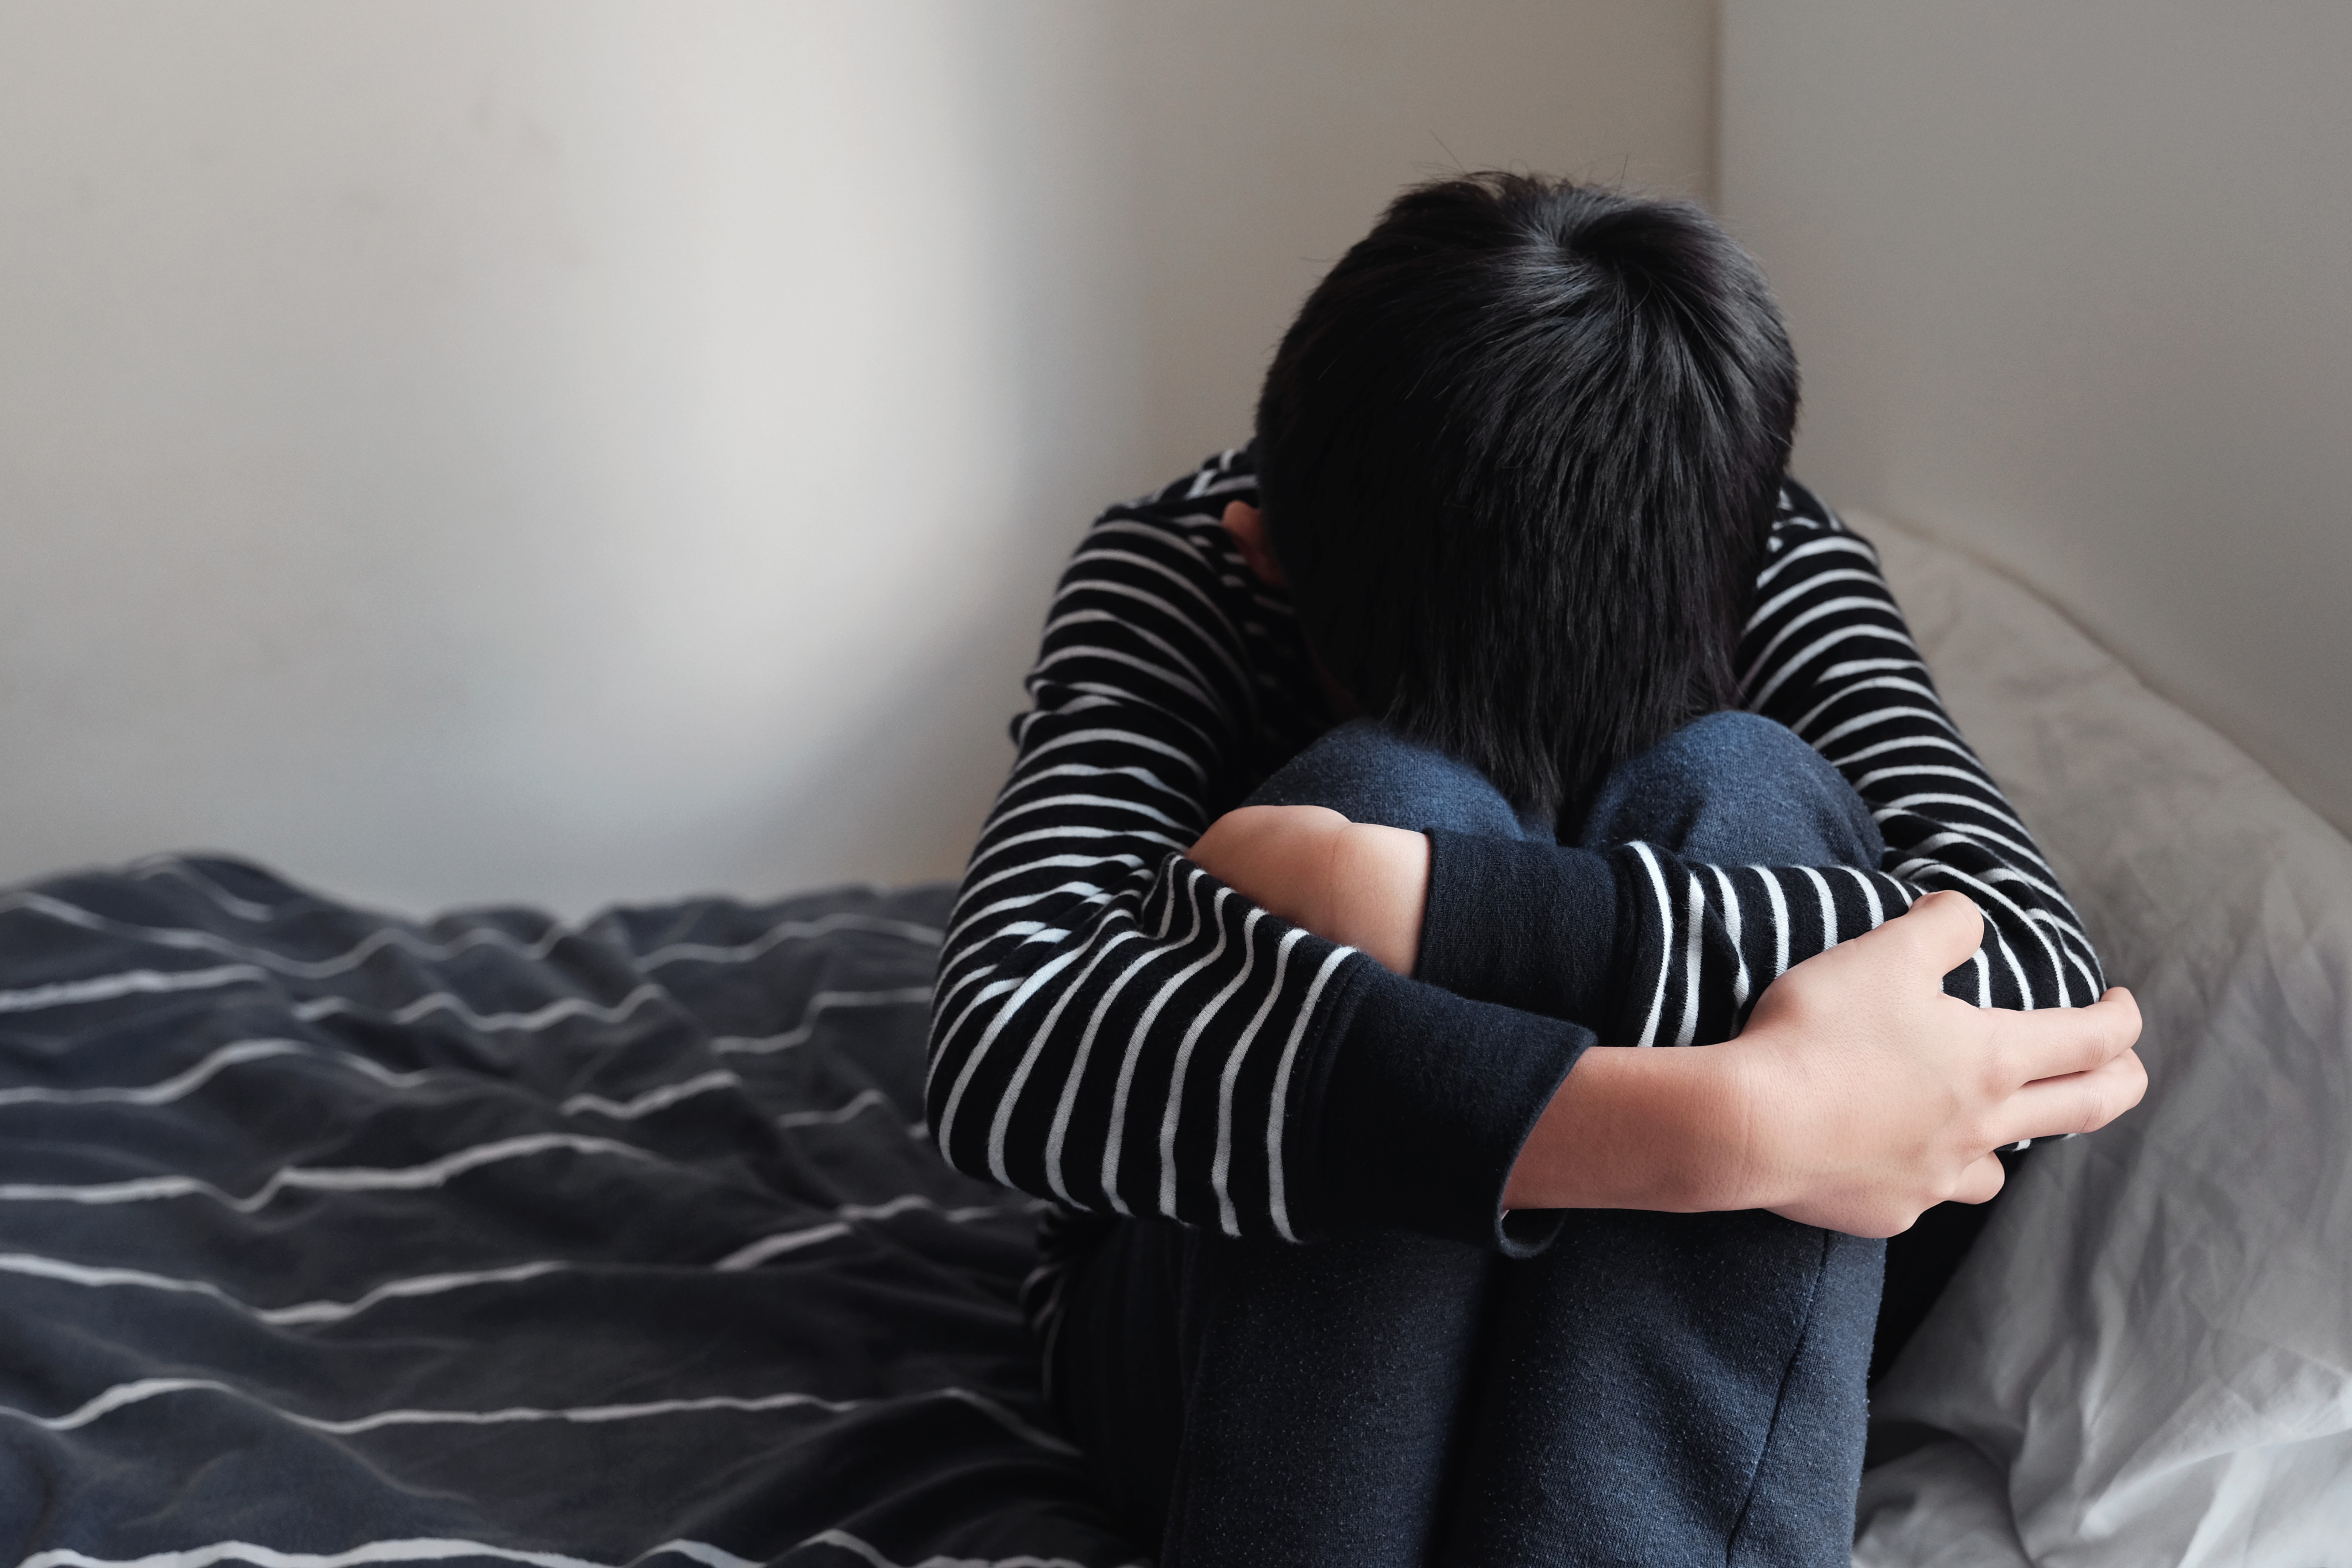 ADHD and depression are the most common mental disorders among Hong Kong schoolchildren, surveys reveal. Photo: Shutterstock

